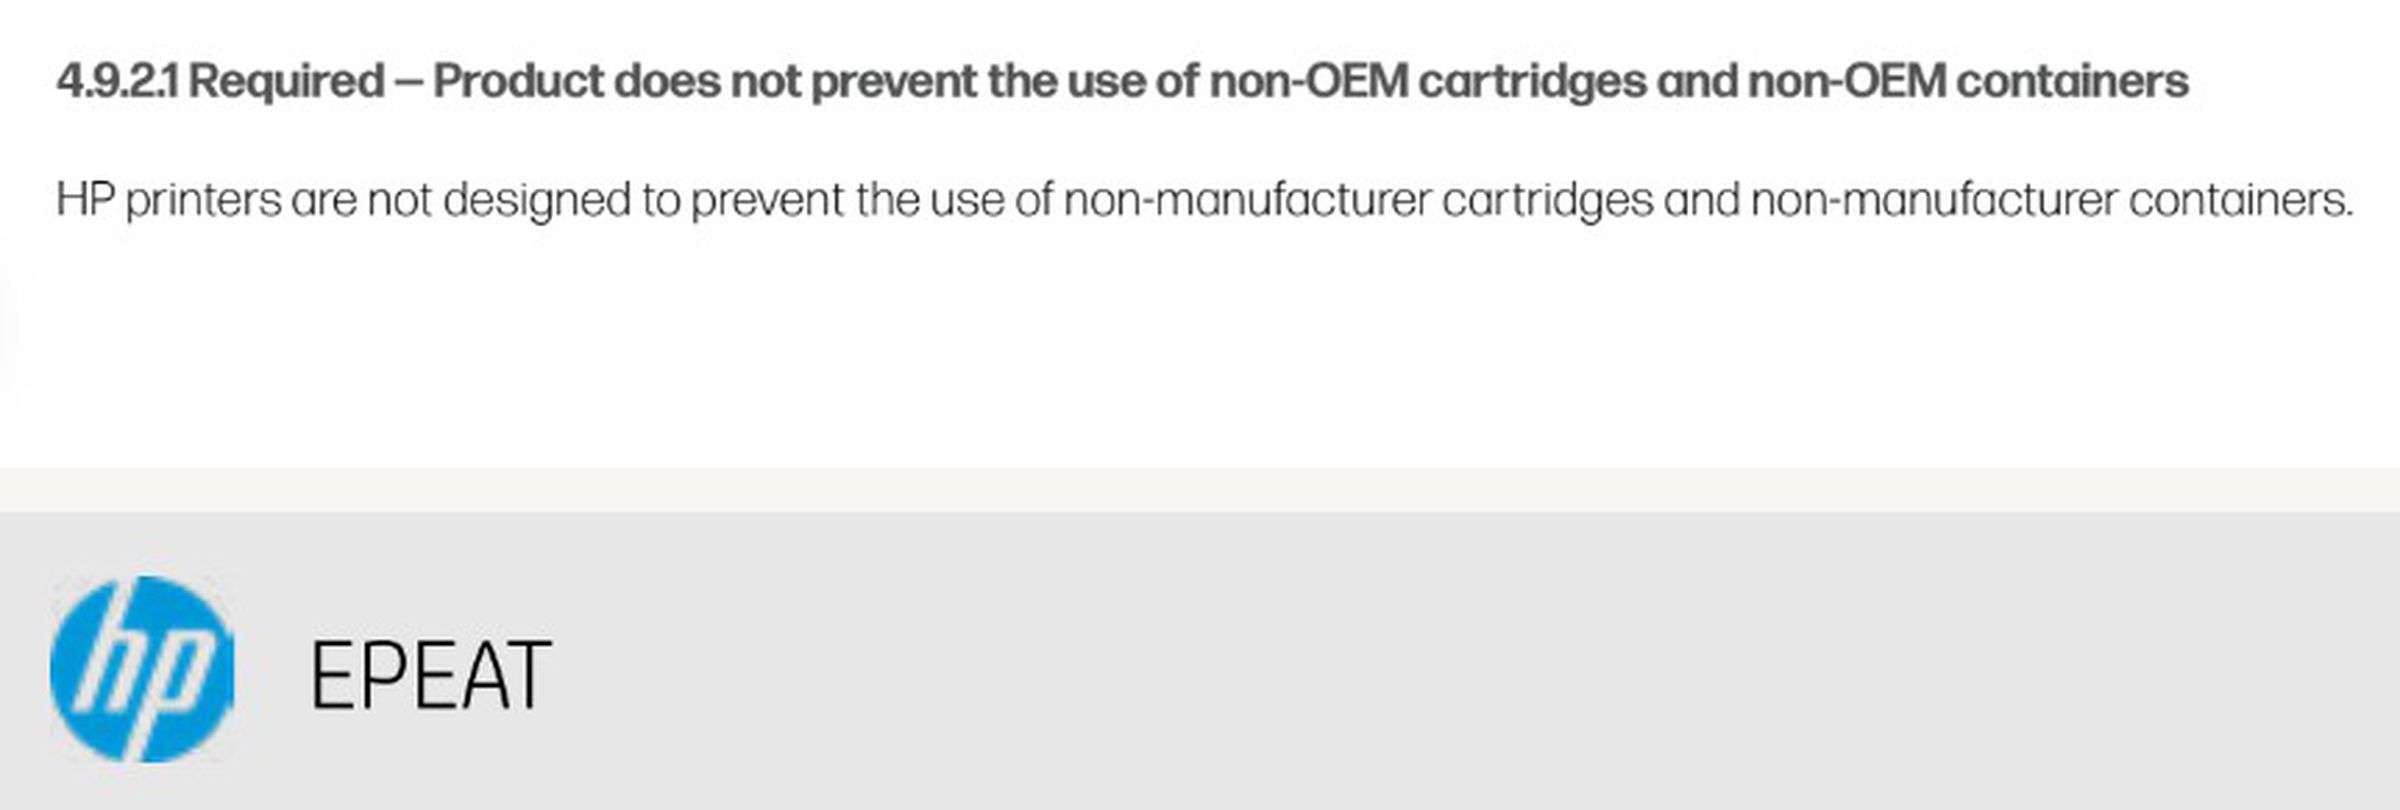 “HP printers are not designed to prevent the use of non-manufacturer cartridges,” the company claims.